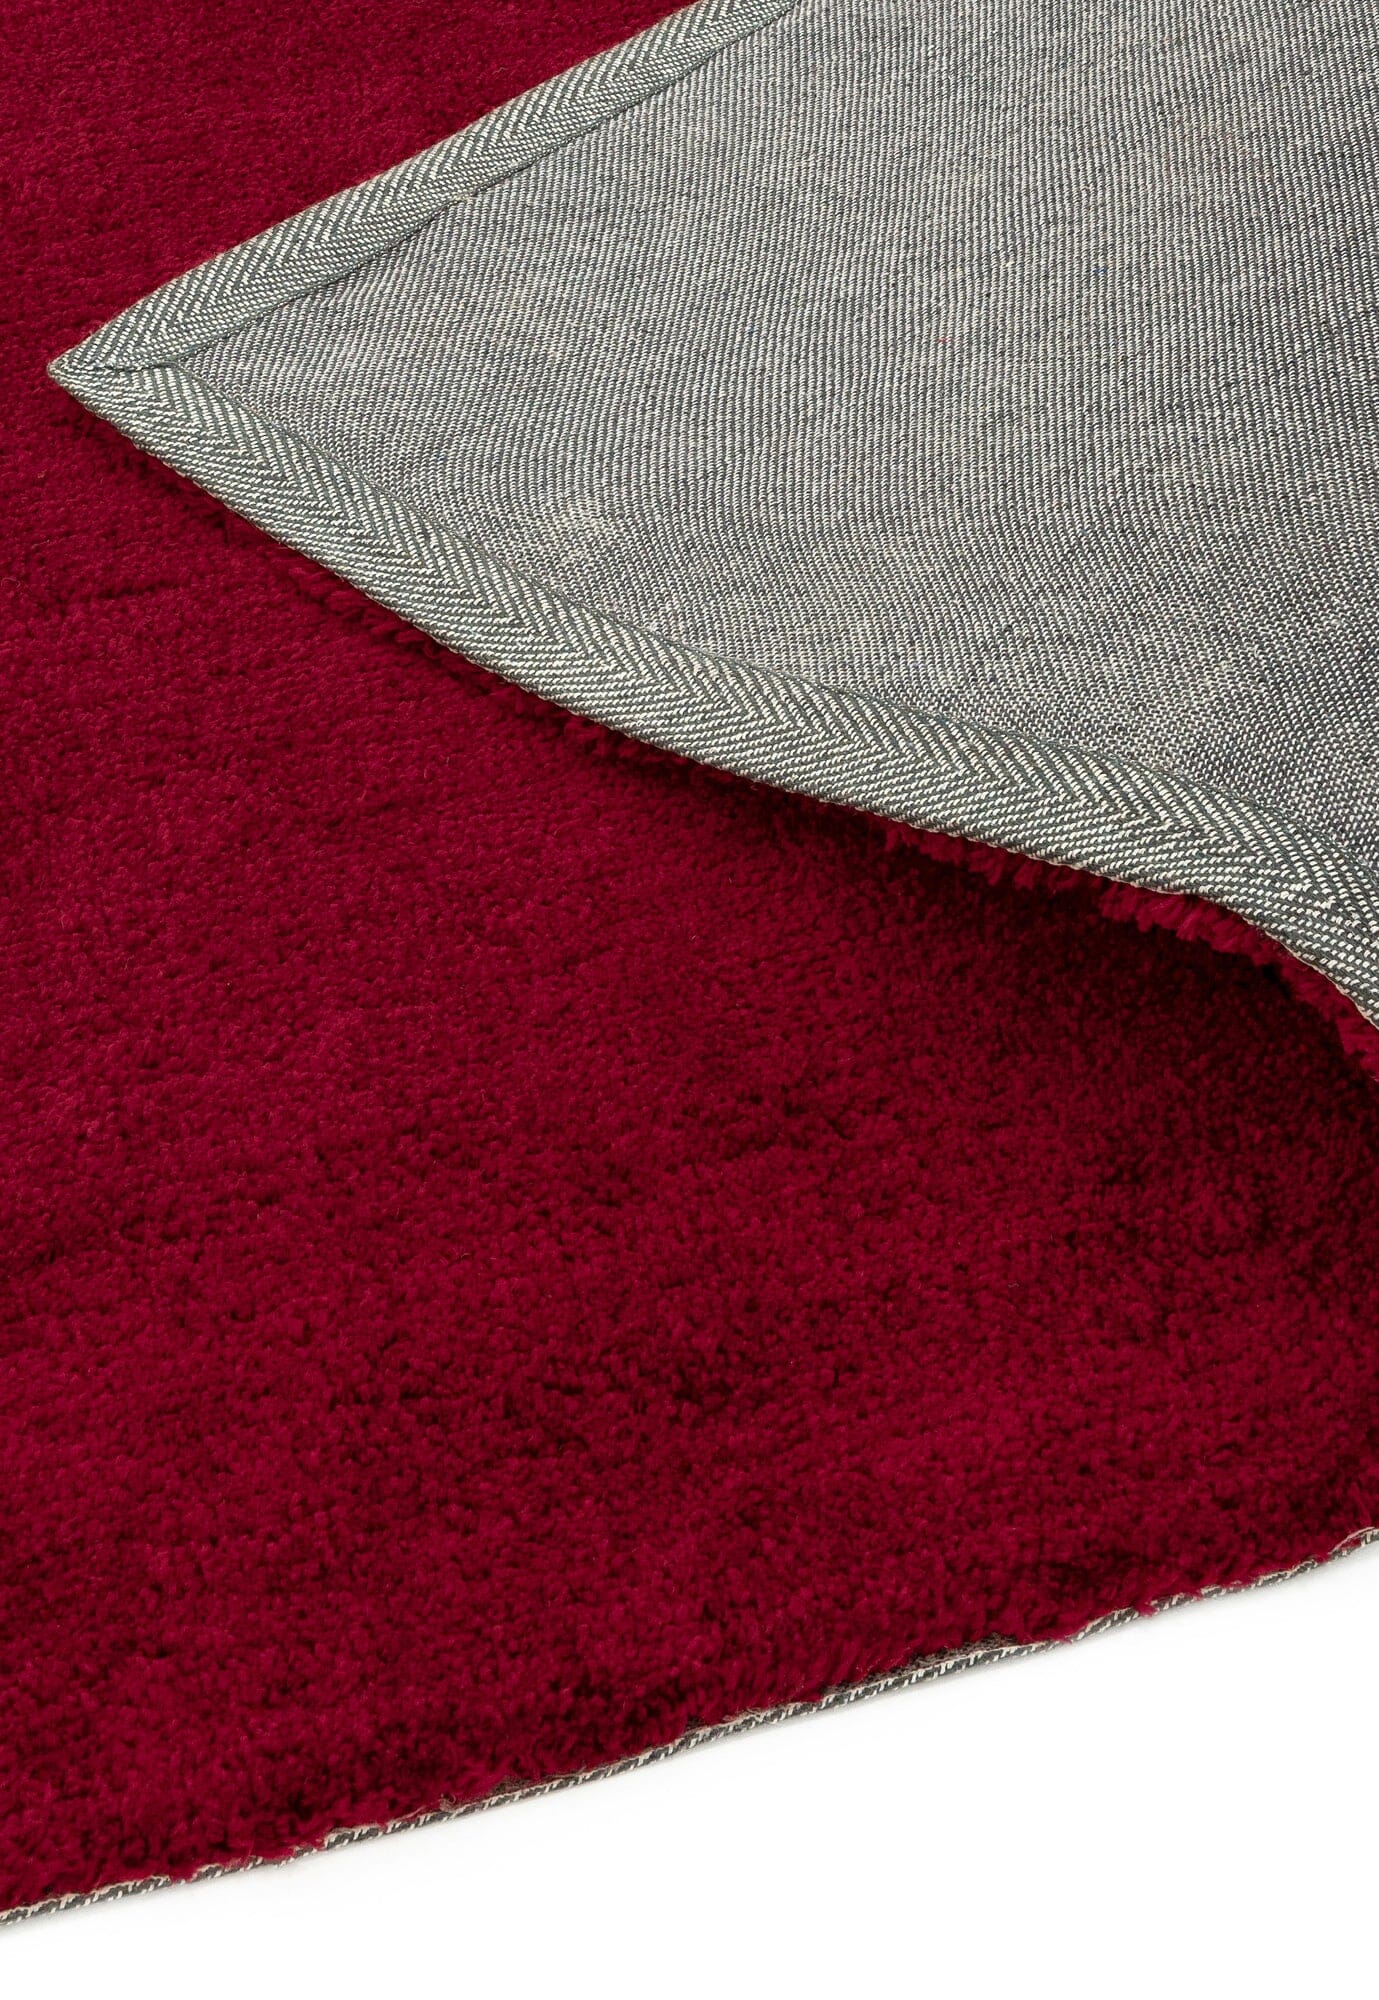  Asiatic Carpets-Asiatic Carpets Milo Table Tufted Rug Berry - 160 x 230cm-Red 541 